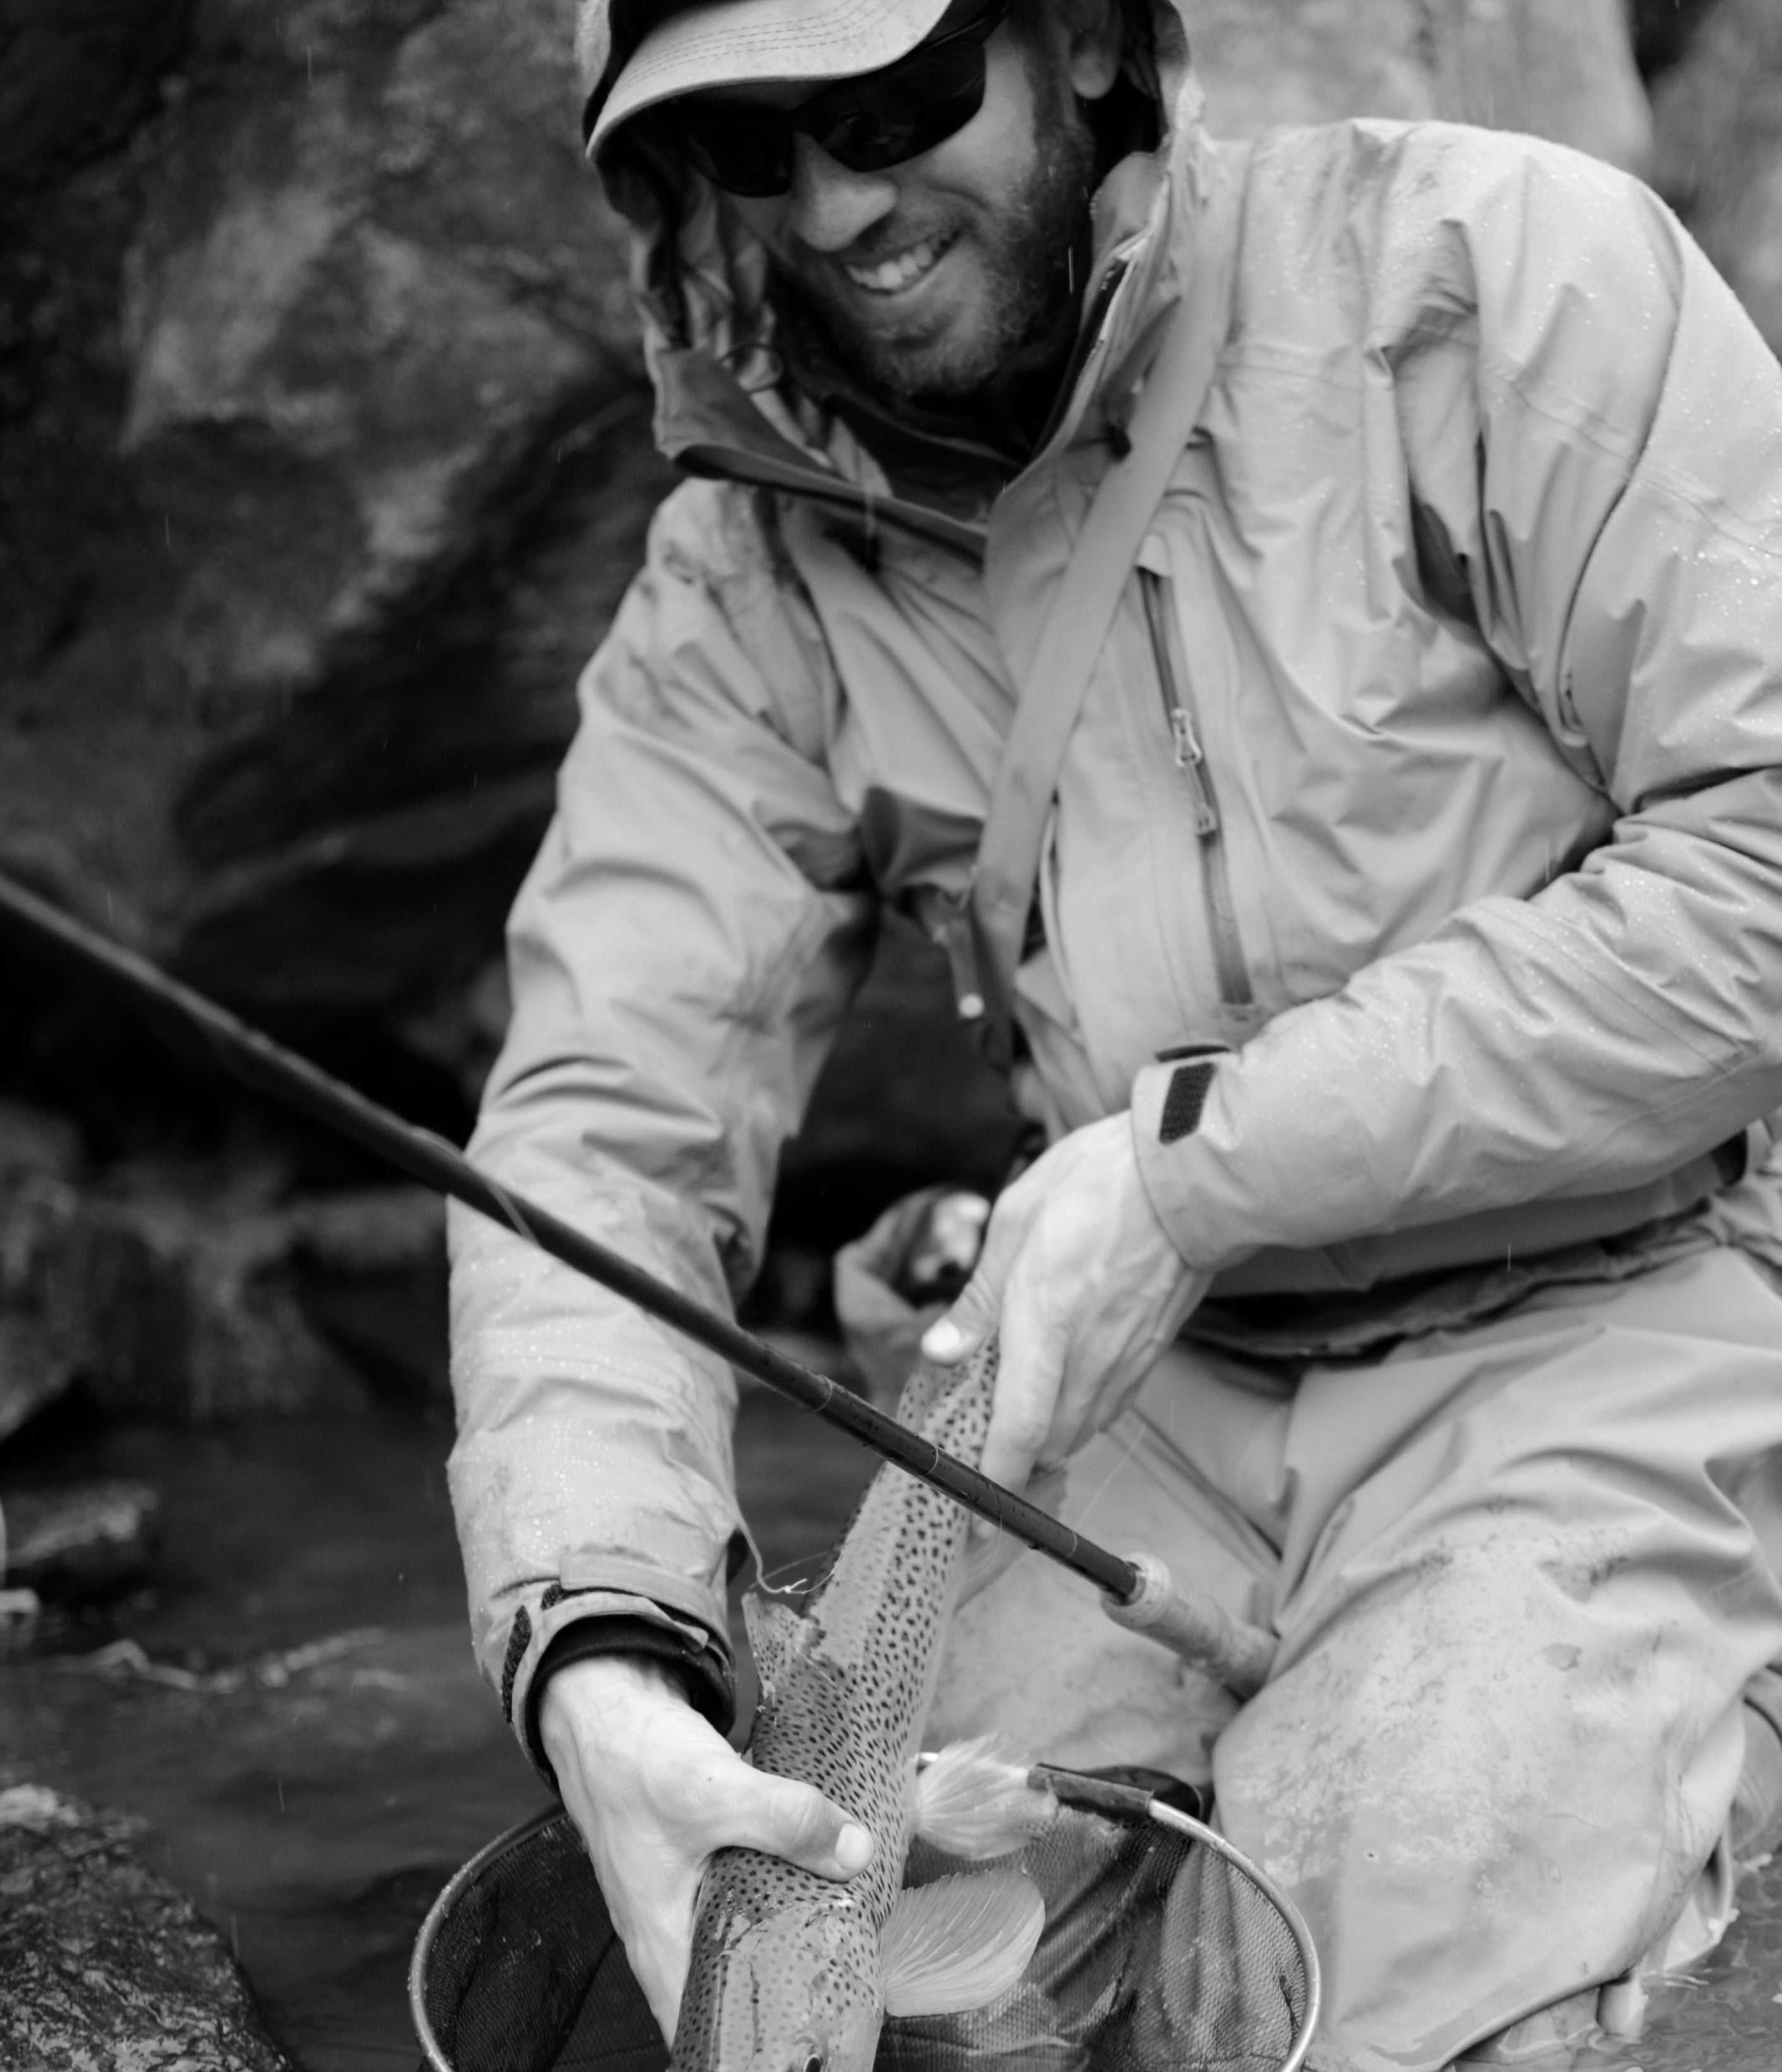 Join Daniel Galhardo, founder of Tenkara USA, for six days of tenkara fly- fishing in Patagonia from March 5-12, 2015